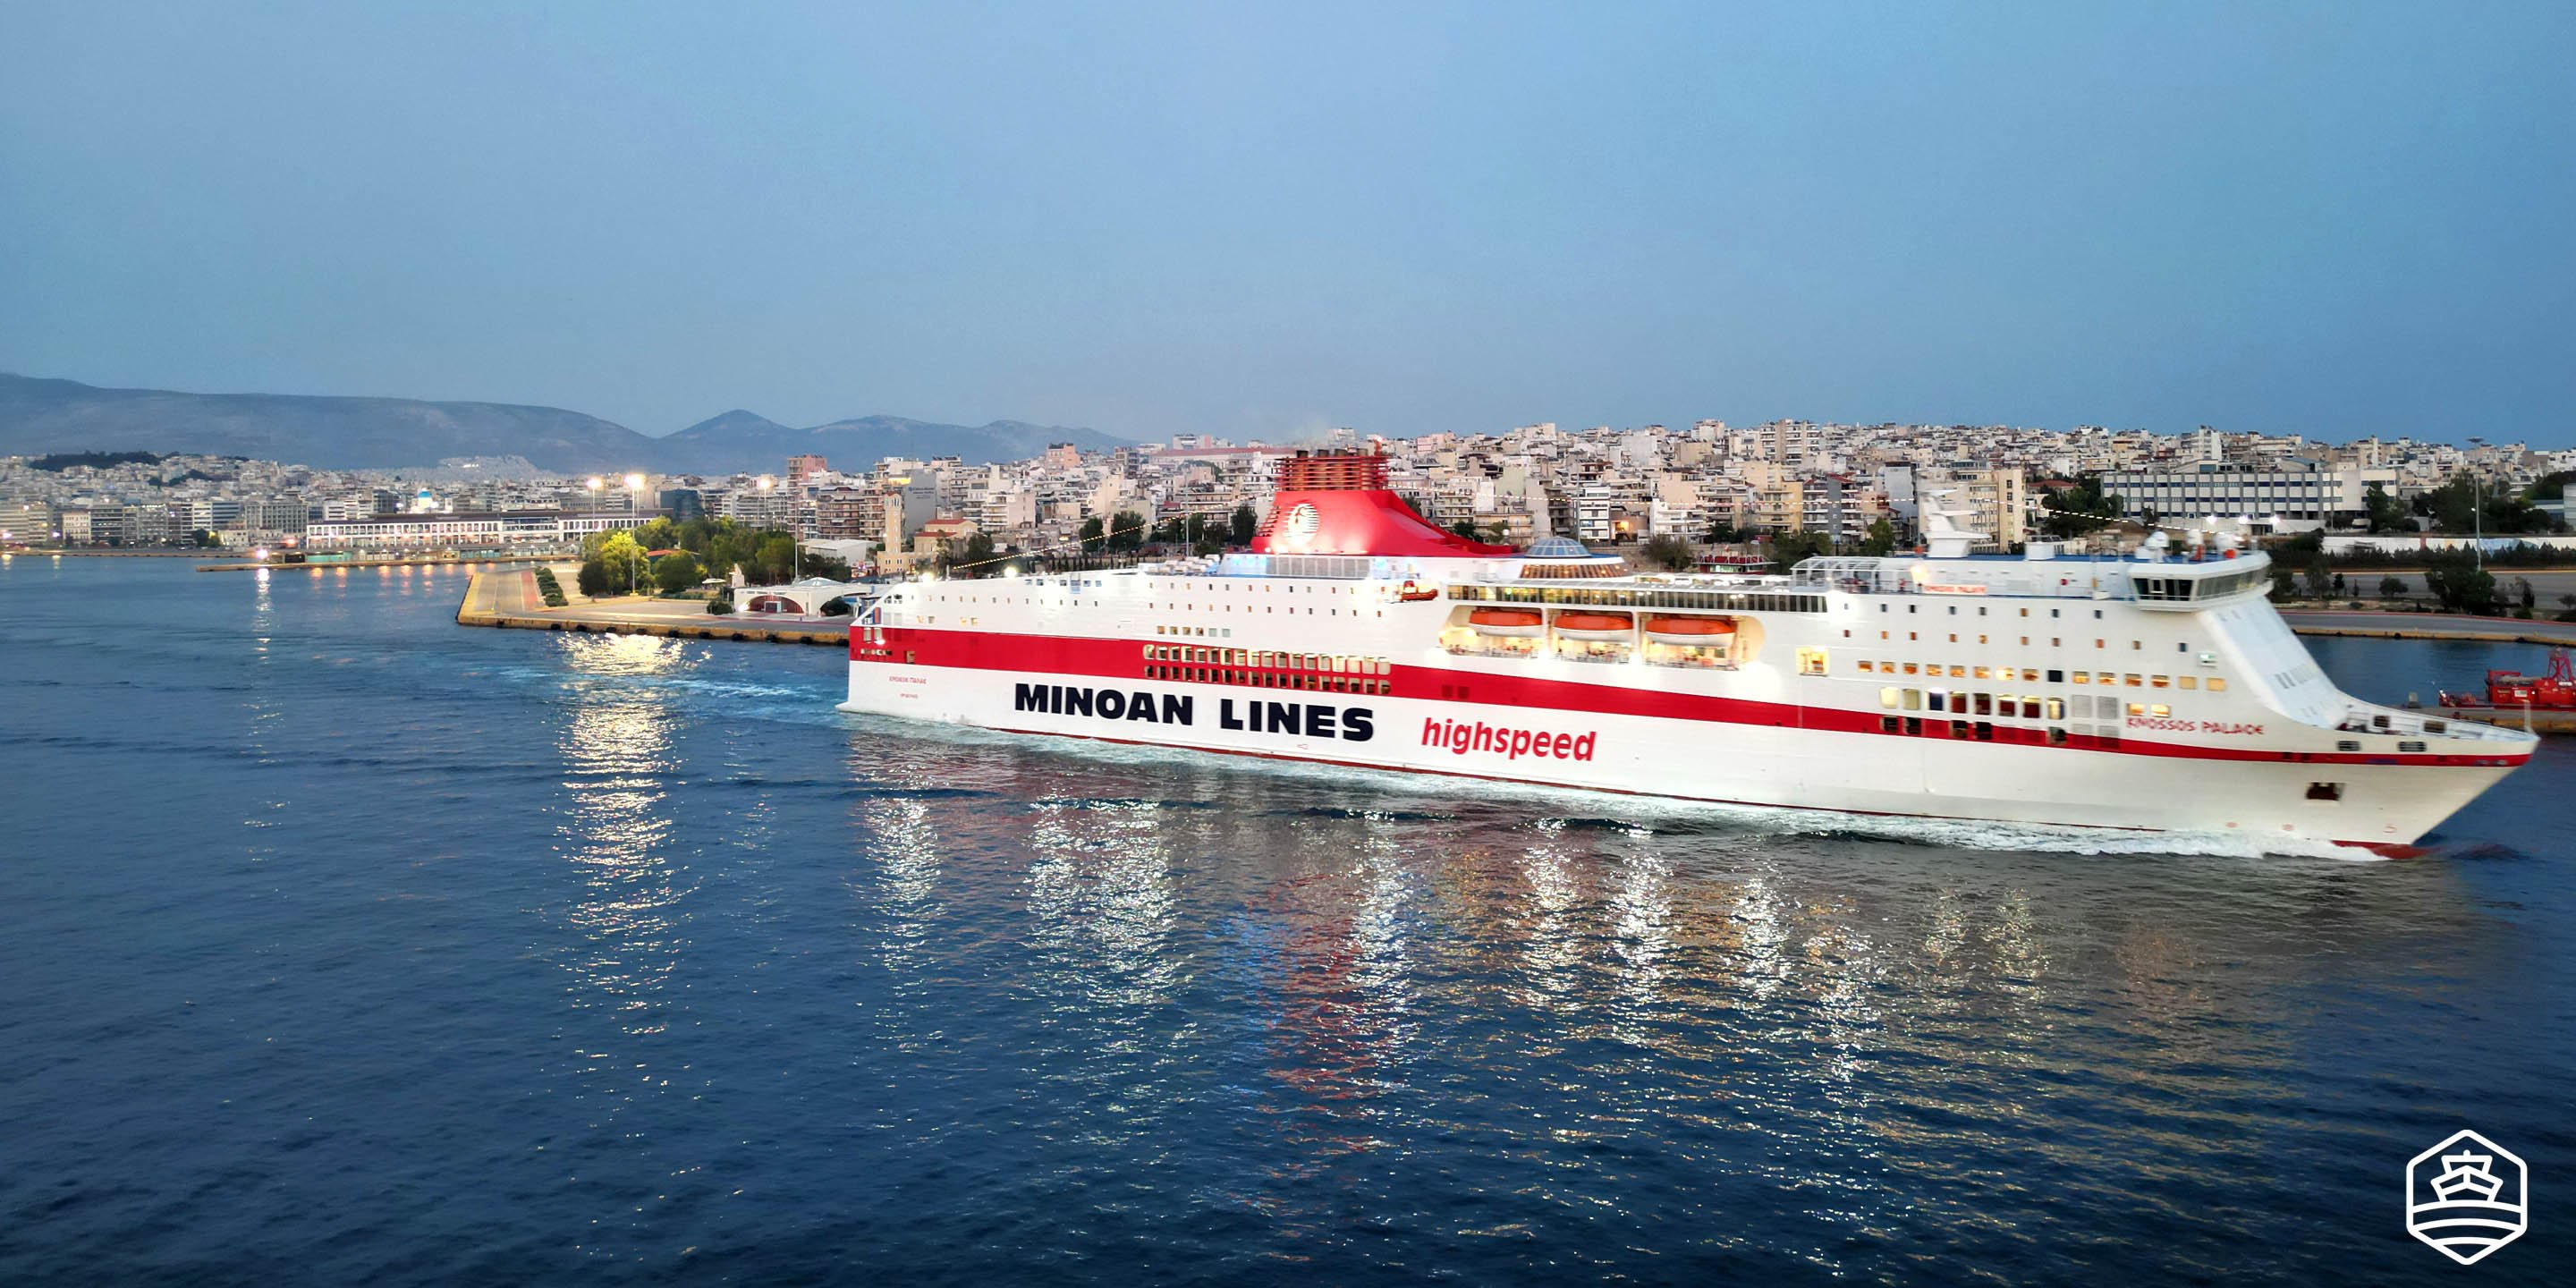 The ferry Knossos Palace of Minoan Lines heading to Heraklion Crete from the port of Piraeus in Athens